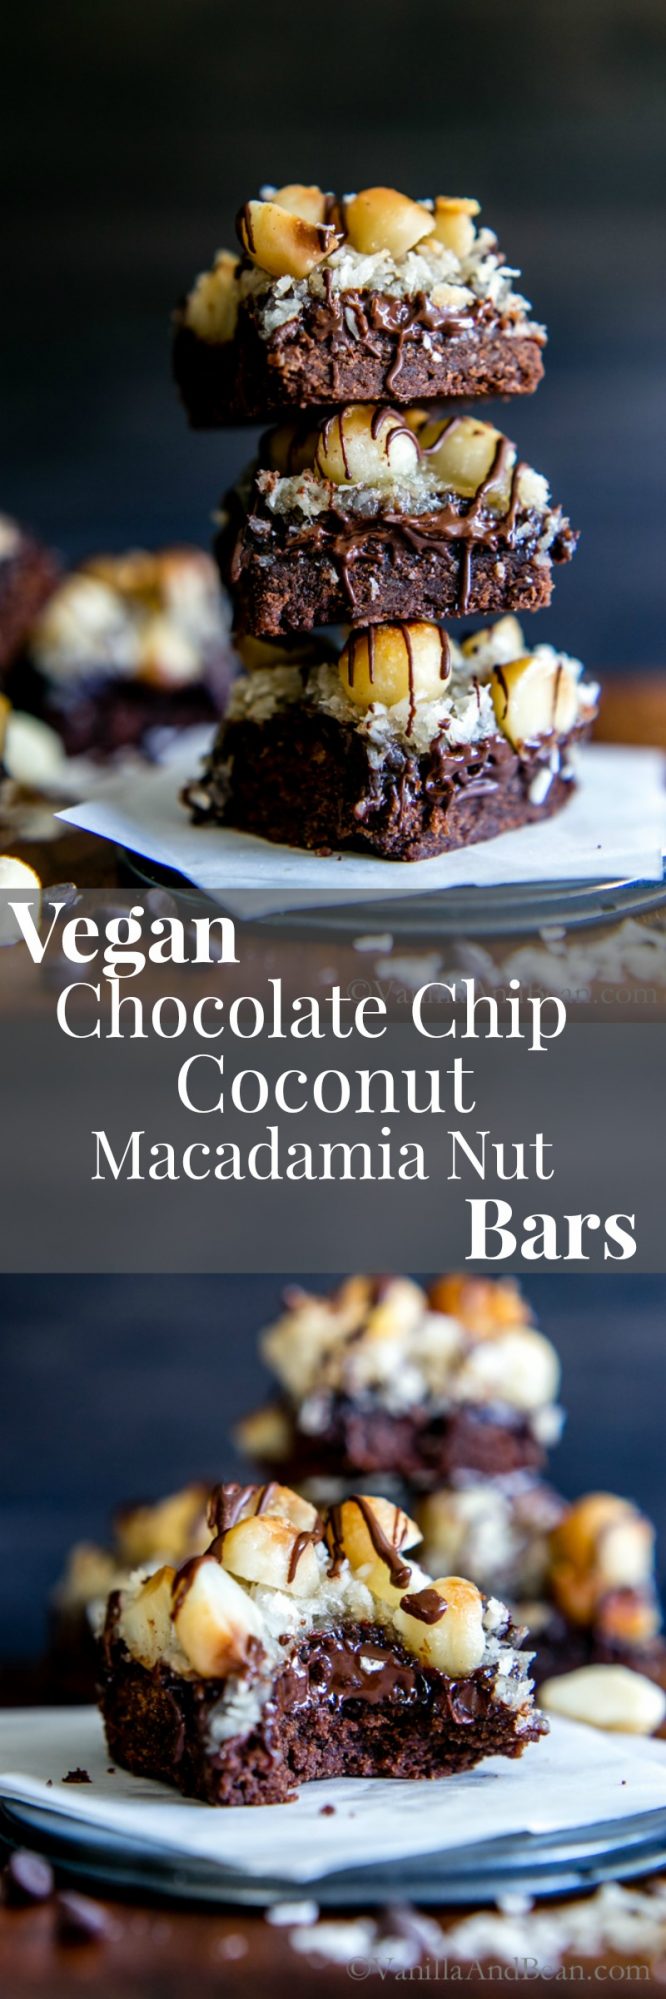 Chocolate cookie base topped with chocolate chips, coconut, macadamia nuts and coated in sweetened condensed coconut milk. Vegan Chocolate Chip Coconut Macadamia Nut Bars are melt in your mouth heaven.